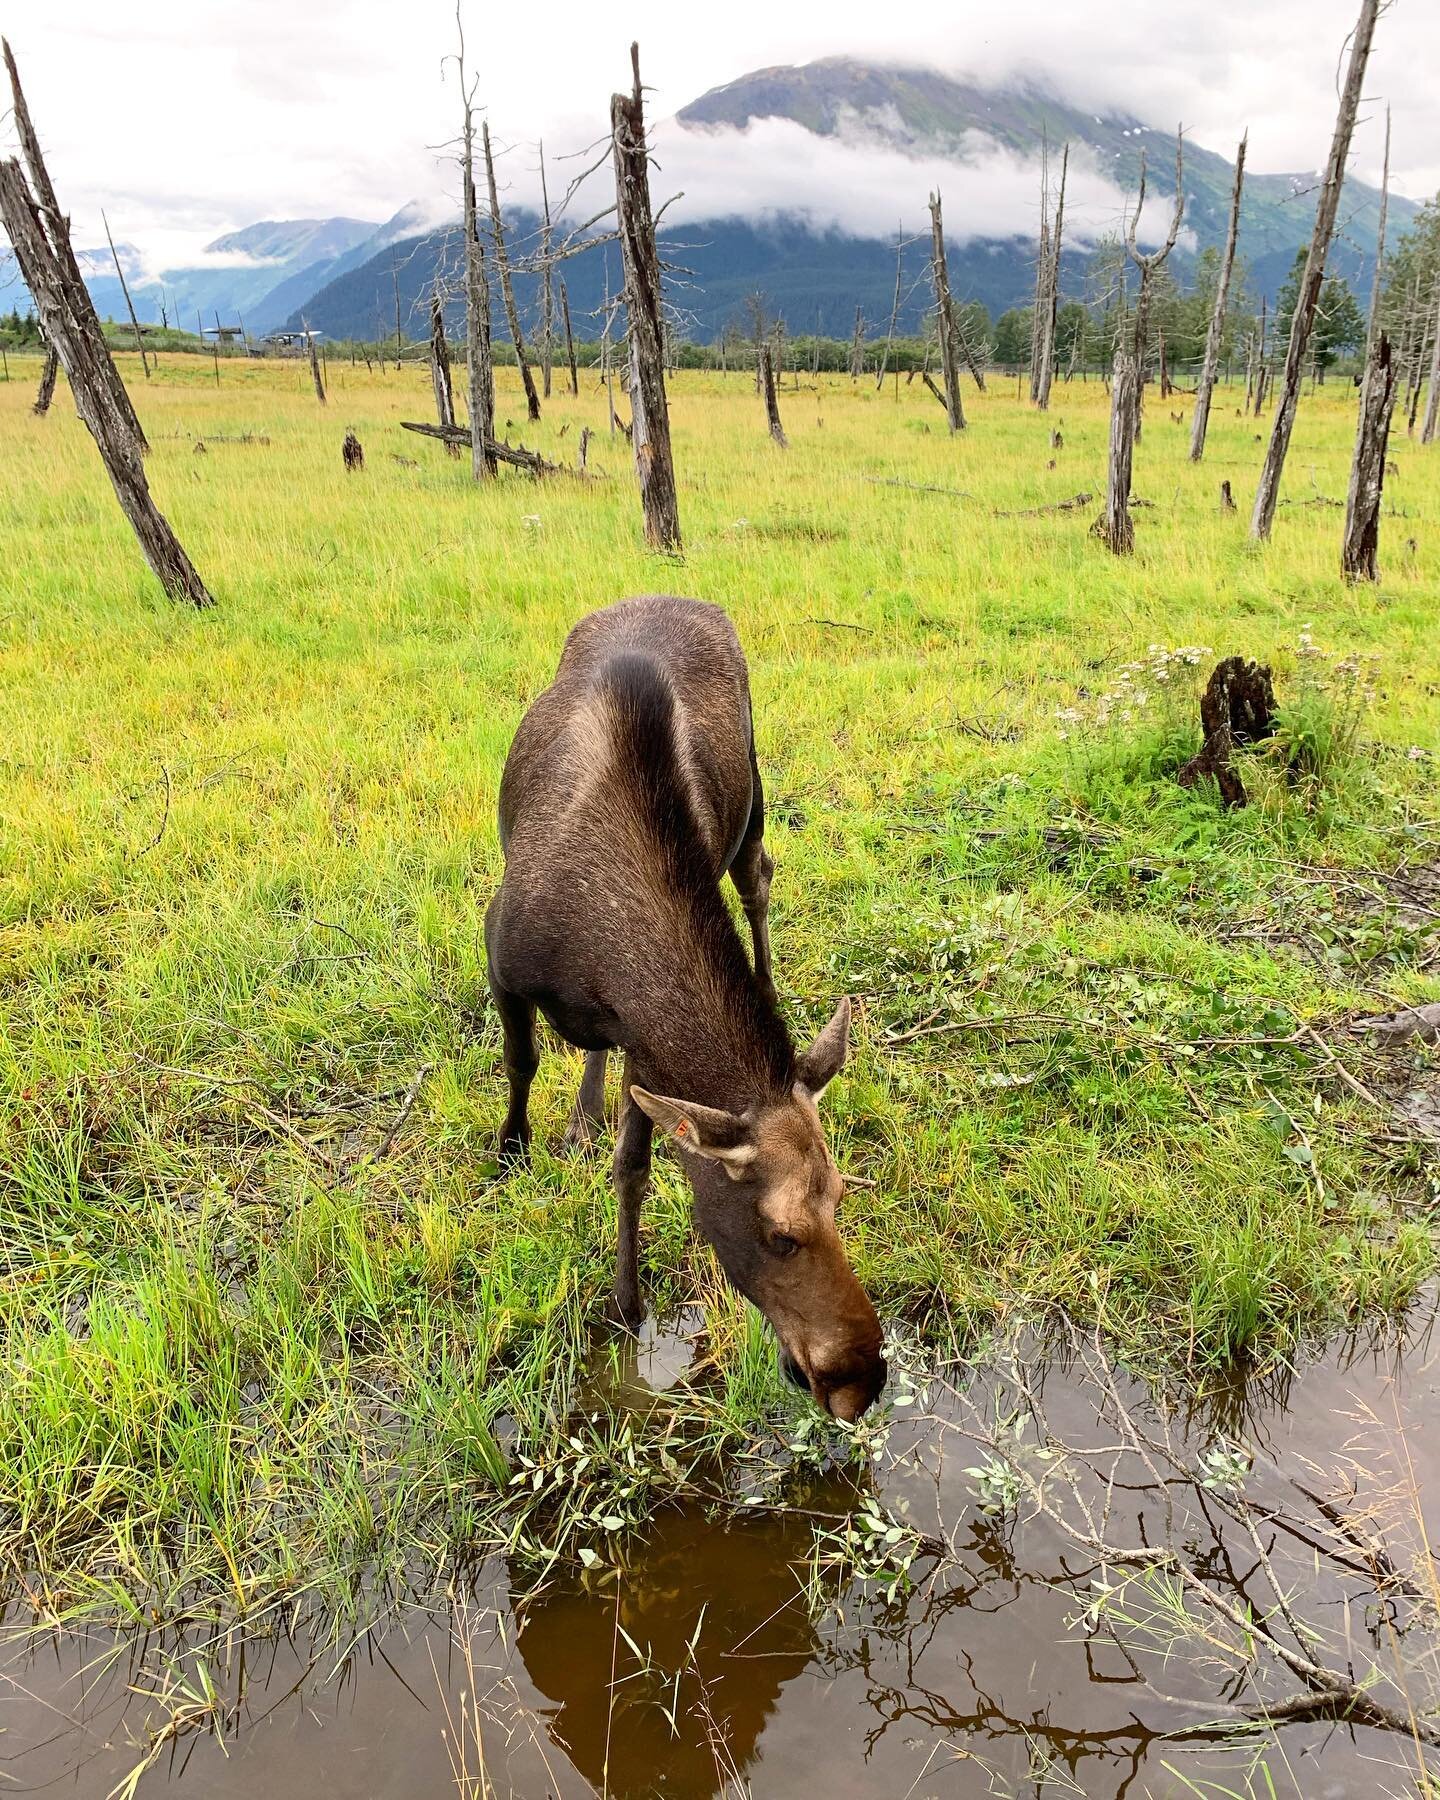 Anyone know the plural of moose? Meese? Mooses? Meeses??
📍 Portage, AK